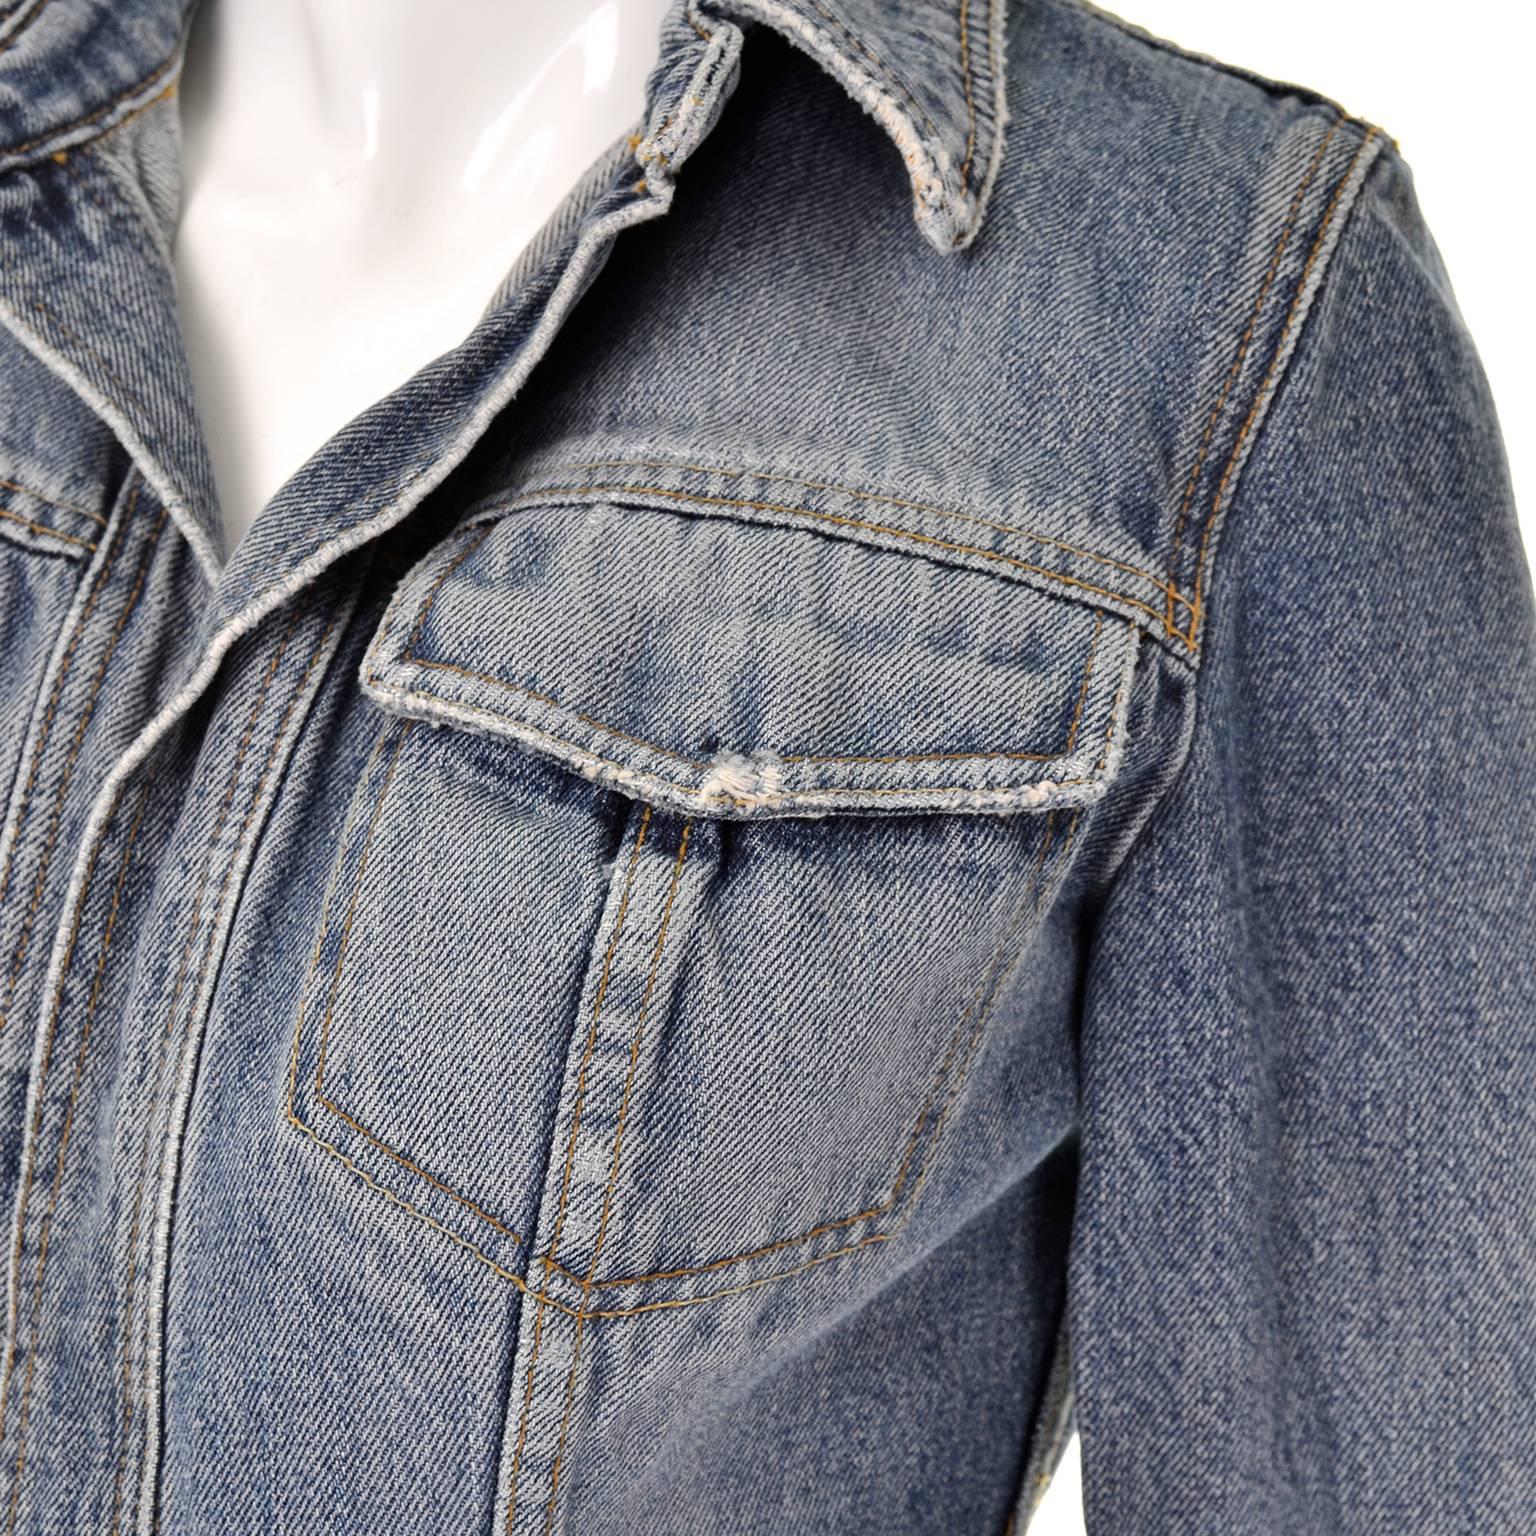 This is a great Dolce & Gabbana denim  jacket with distressing along the collar, pockets and hem. We love this jean jacket and it the way it opens in the front with no buttons or hardware. This piece is 100% cotton and was made in Italy. The jacket